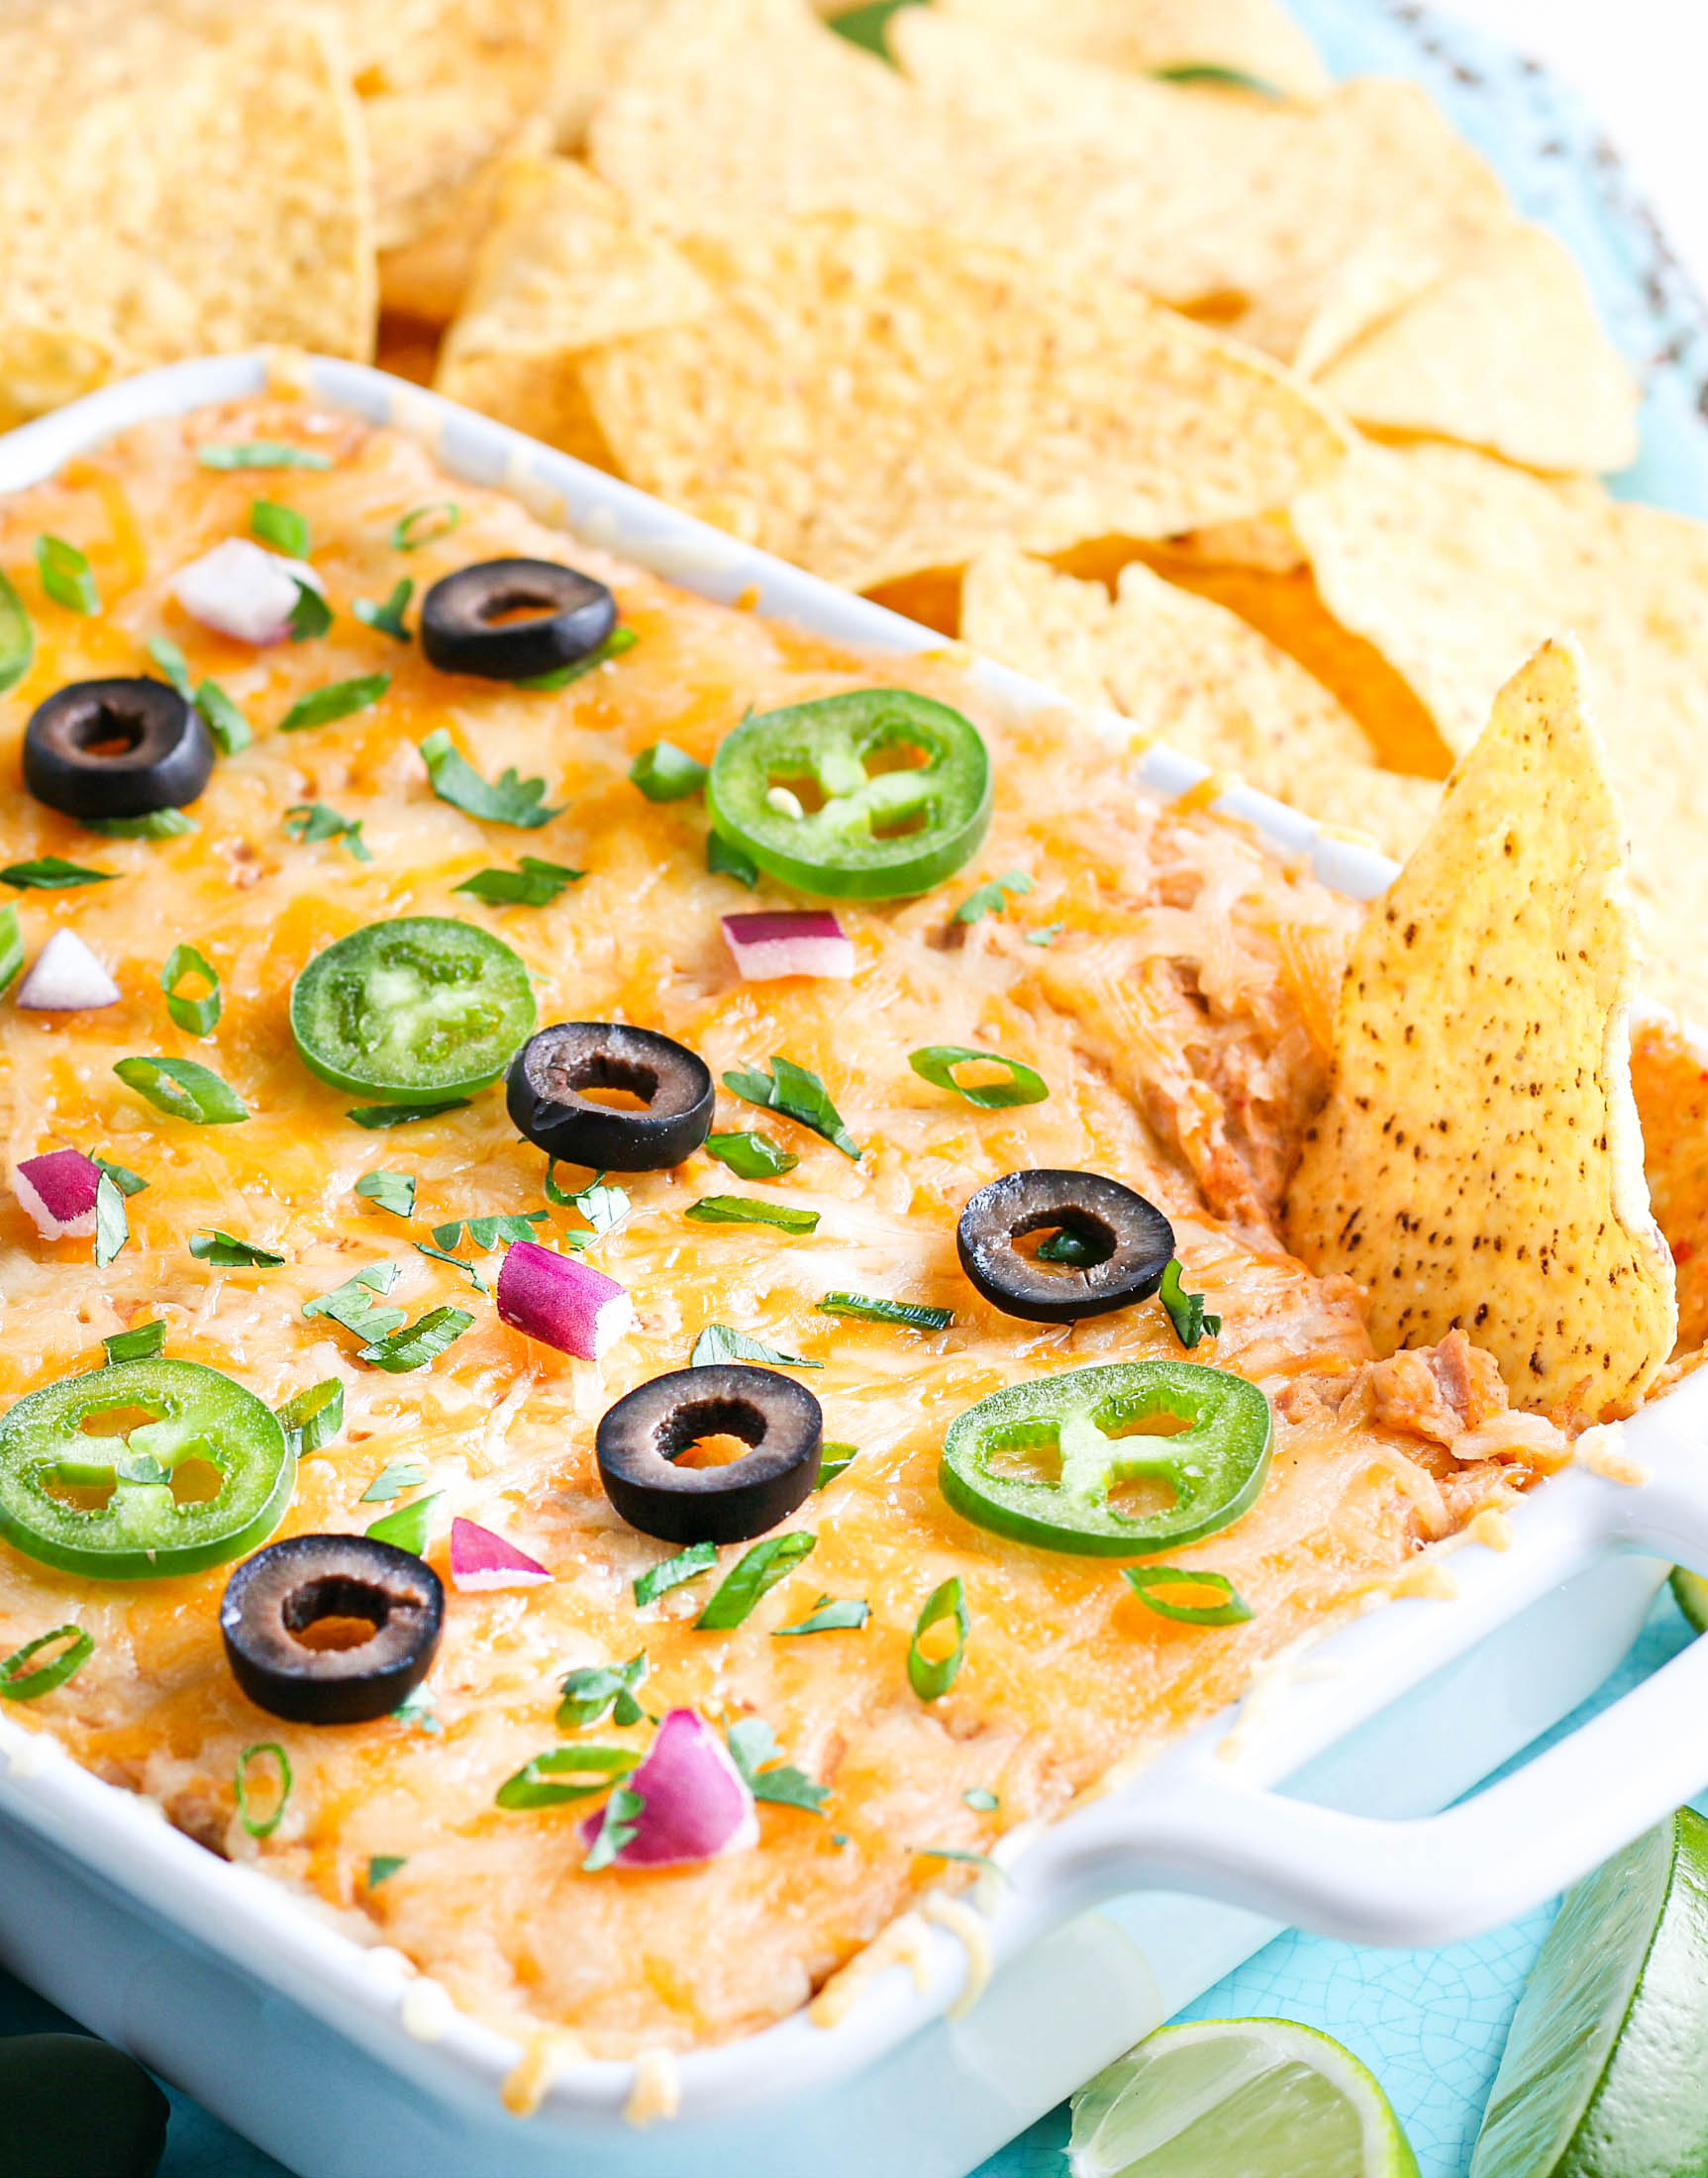 How to make an easy bean dip appetizer